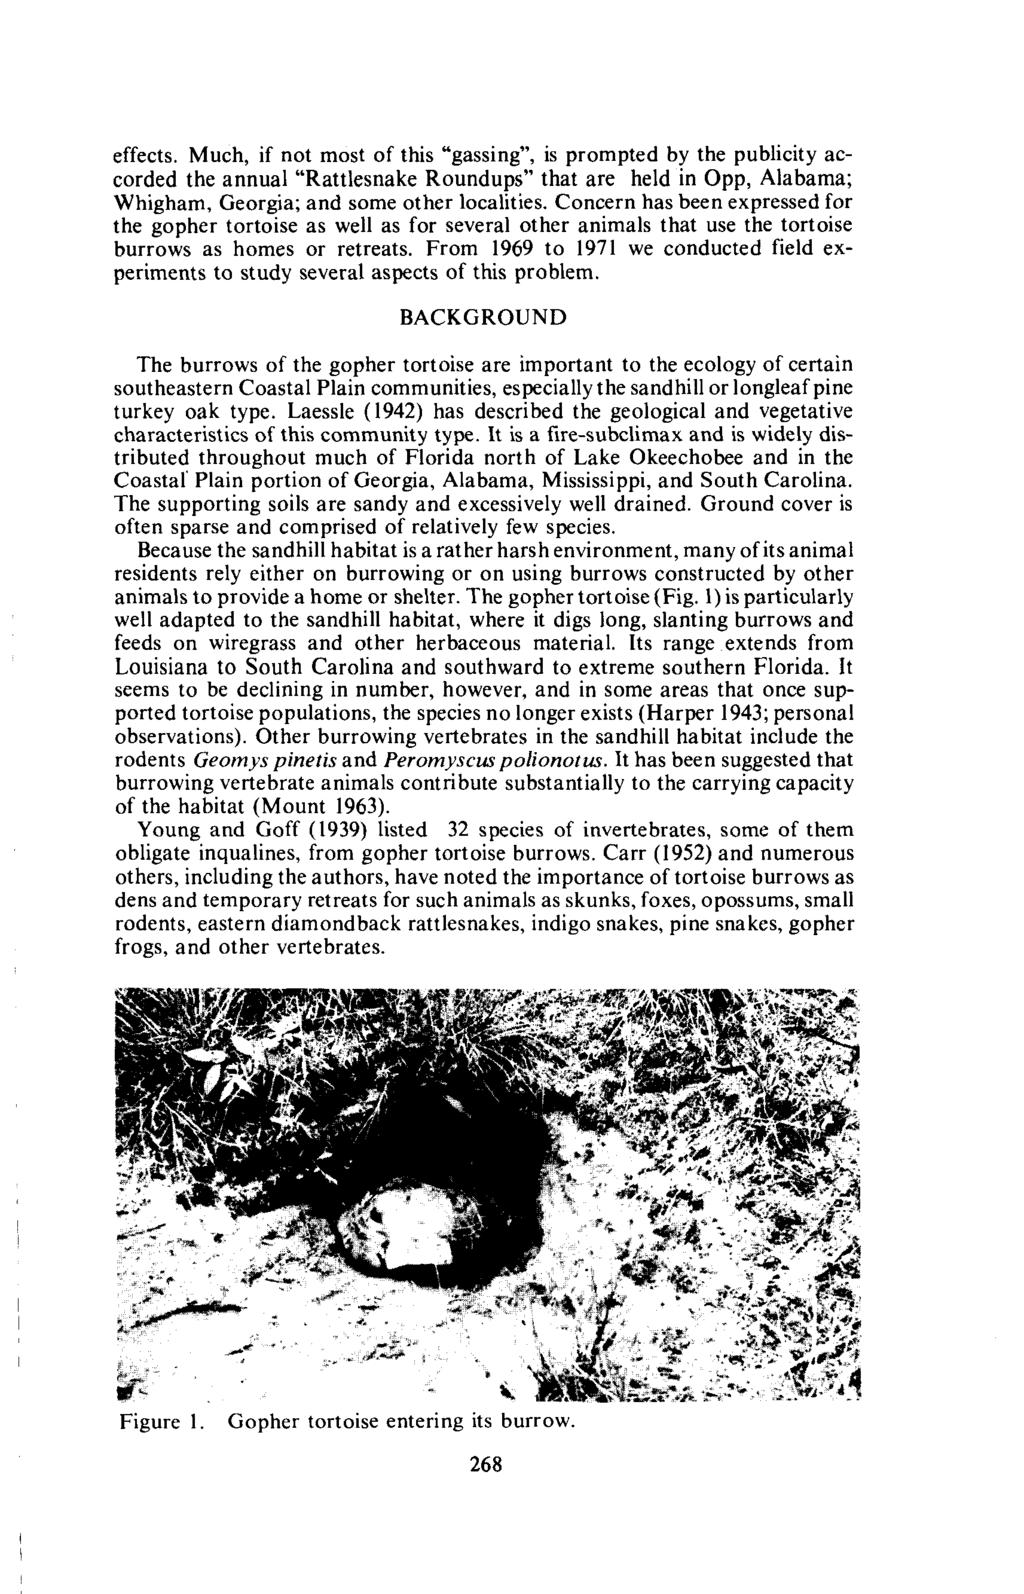 effects. Much, if not most of this "gassing", is prompted by the publicity accorded the annual "Rattlesnake Roundups" that are held in Opp, Alabama; Whigham, Georgia; and some other localities.